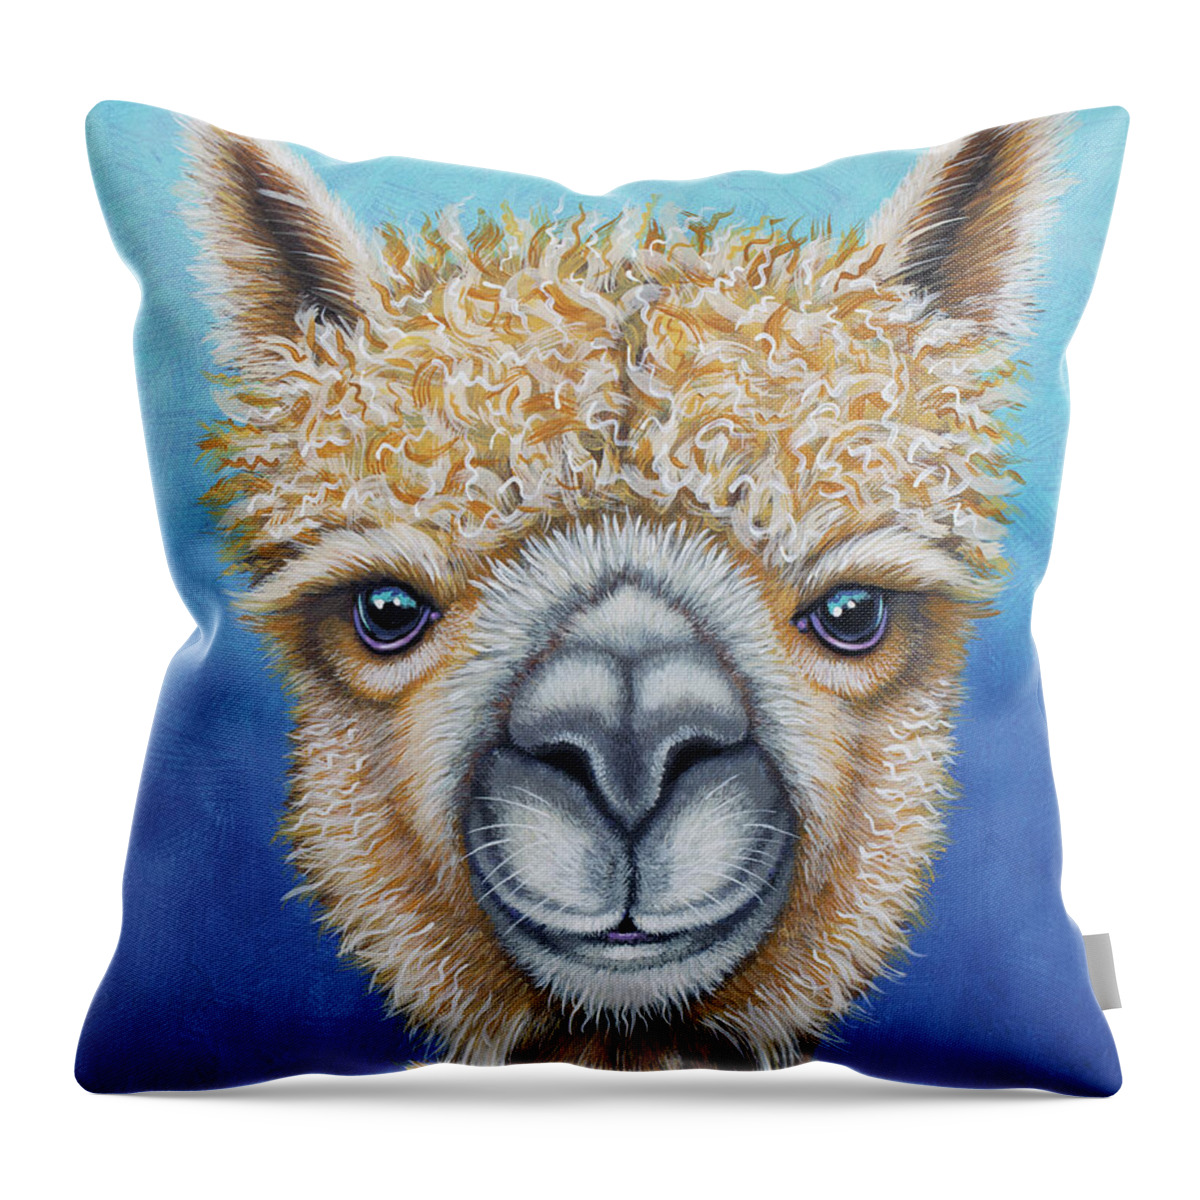 Alpaca Throw Pillow featuring the painting Alpaca Whimsy by Tish Wynne